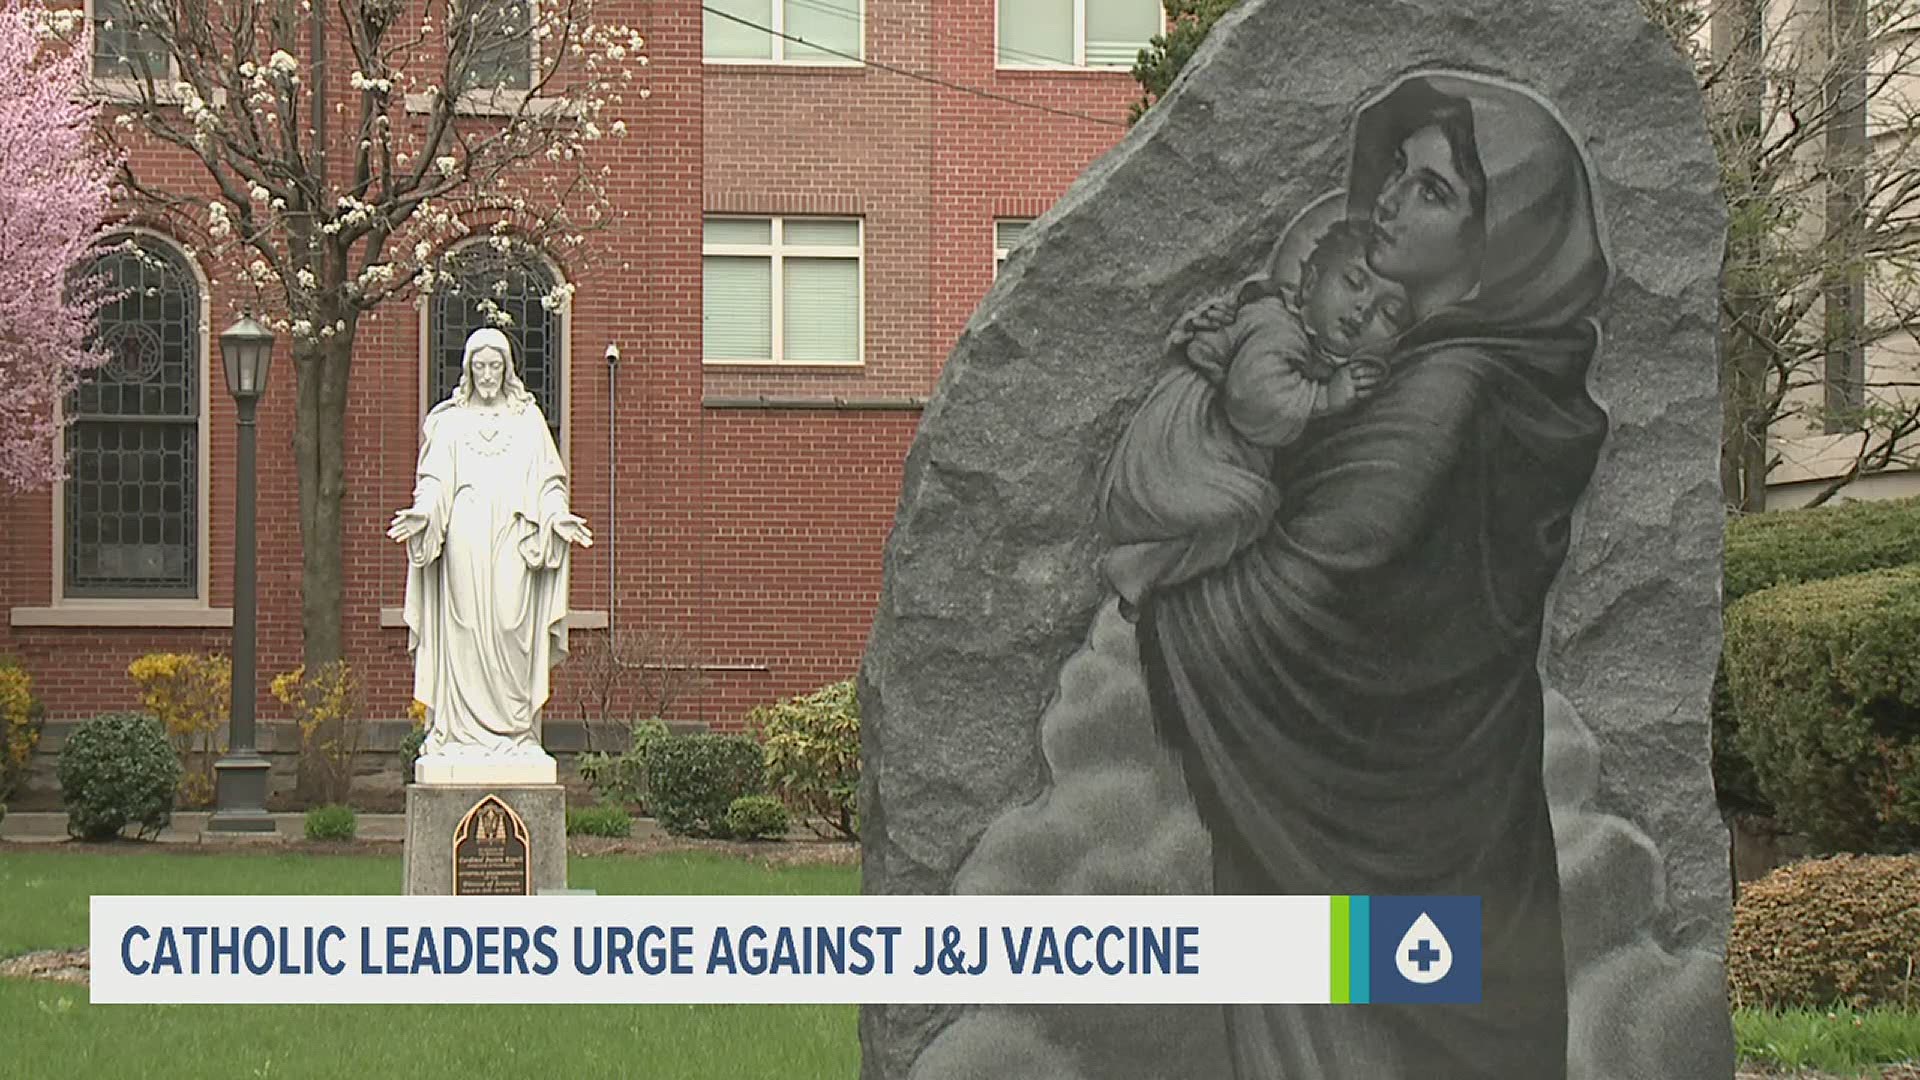 The USCCB is urging Catholics to avoid taking the Johnson & Johnson vaccine after it raised moral concerns over its development.